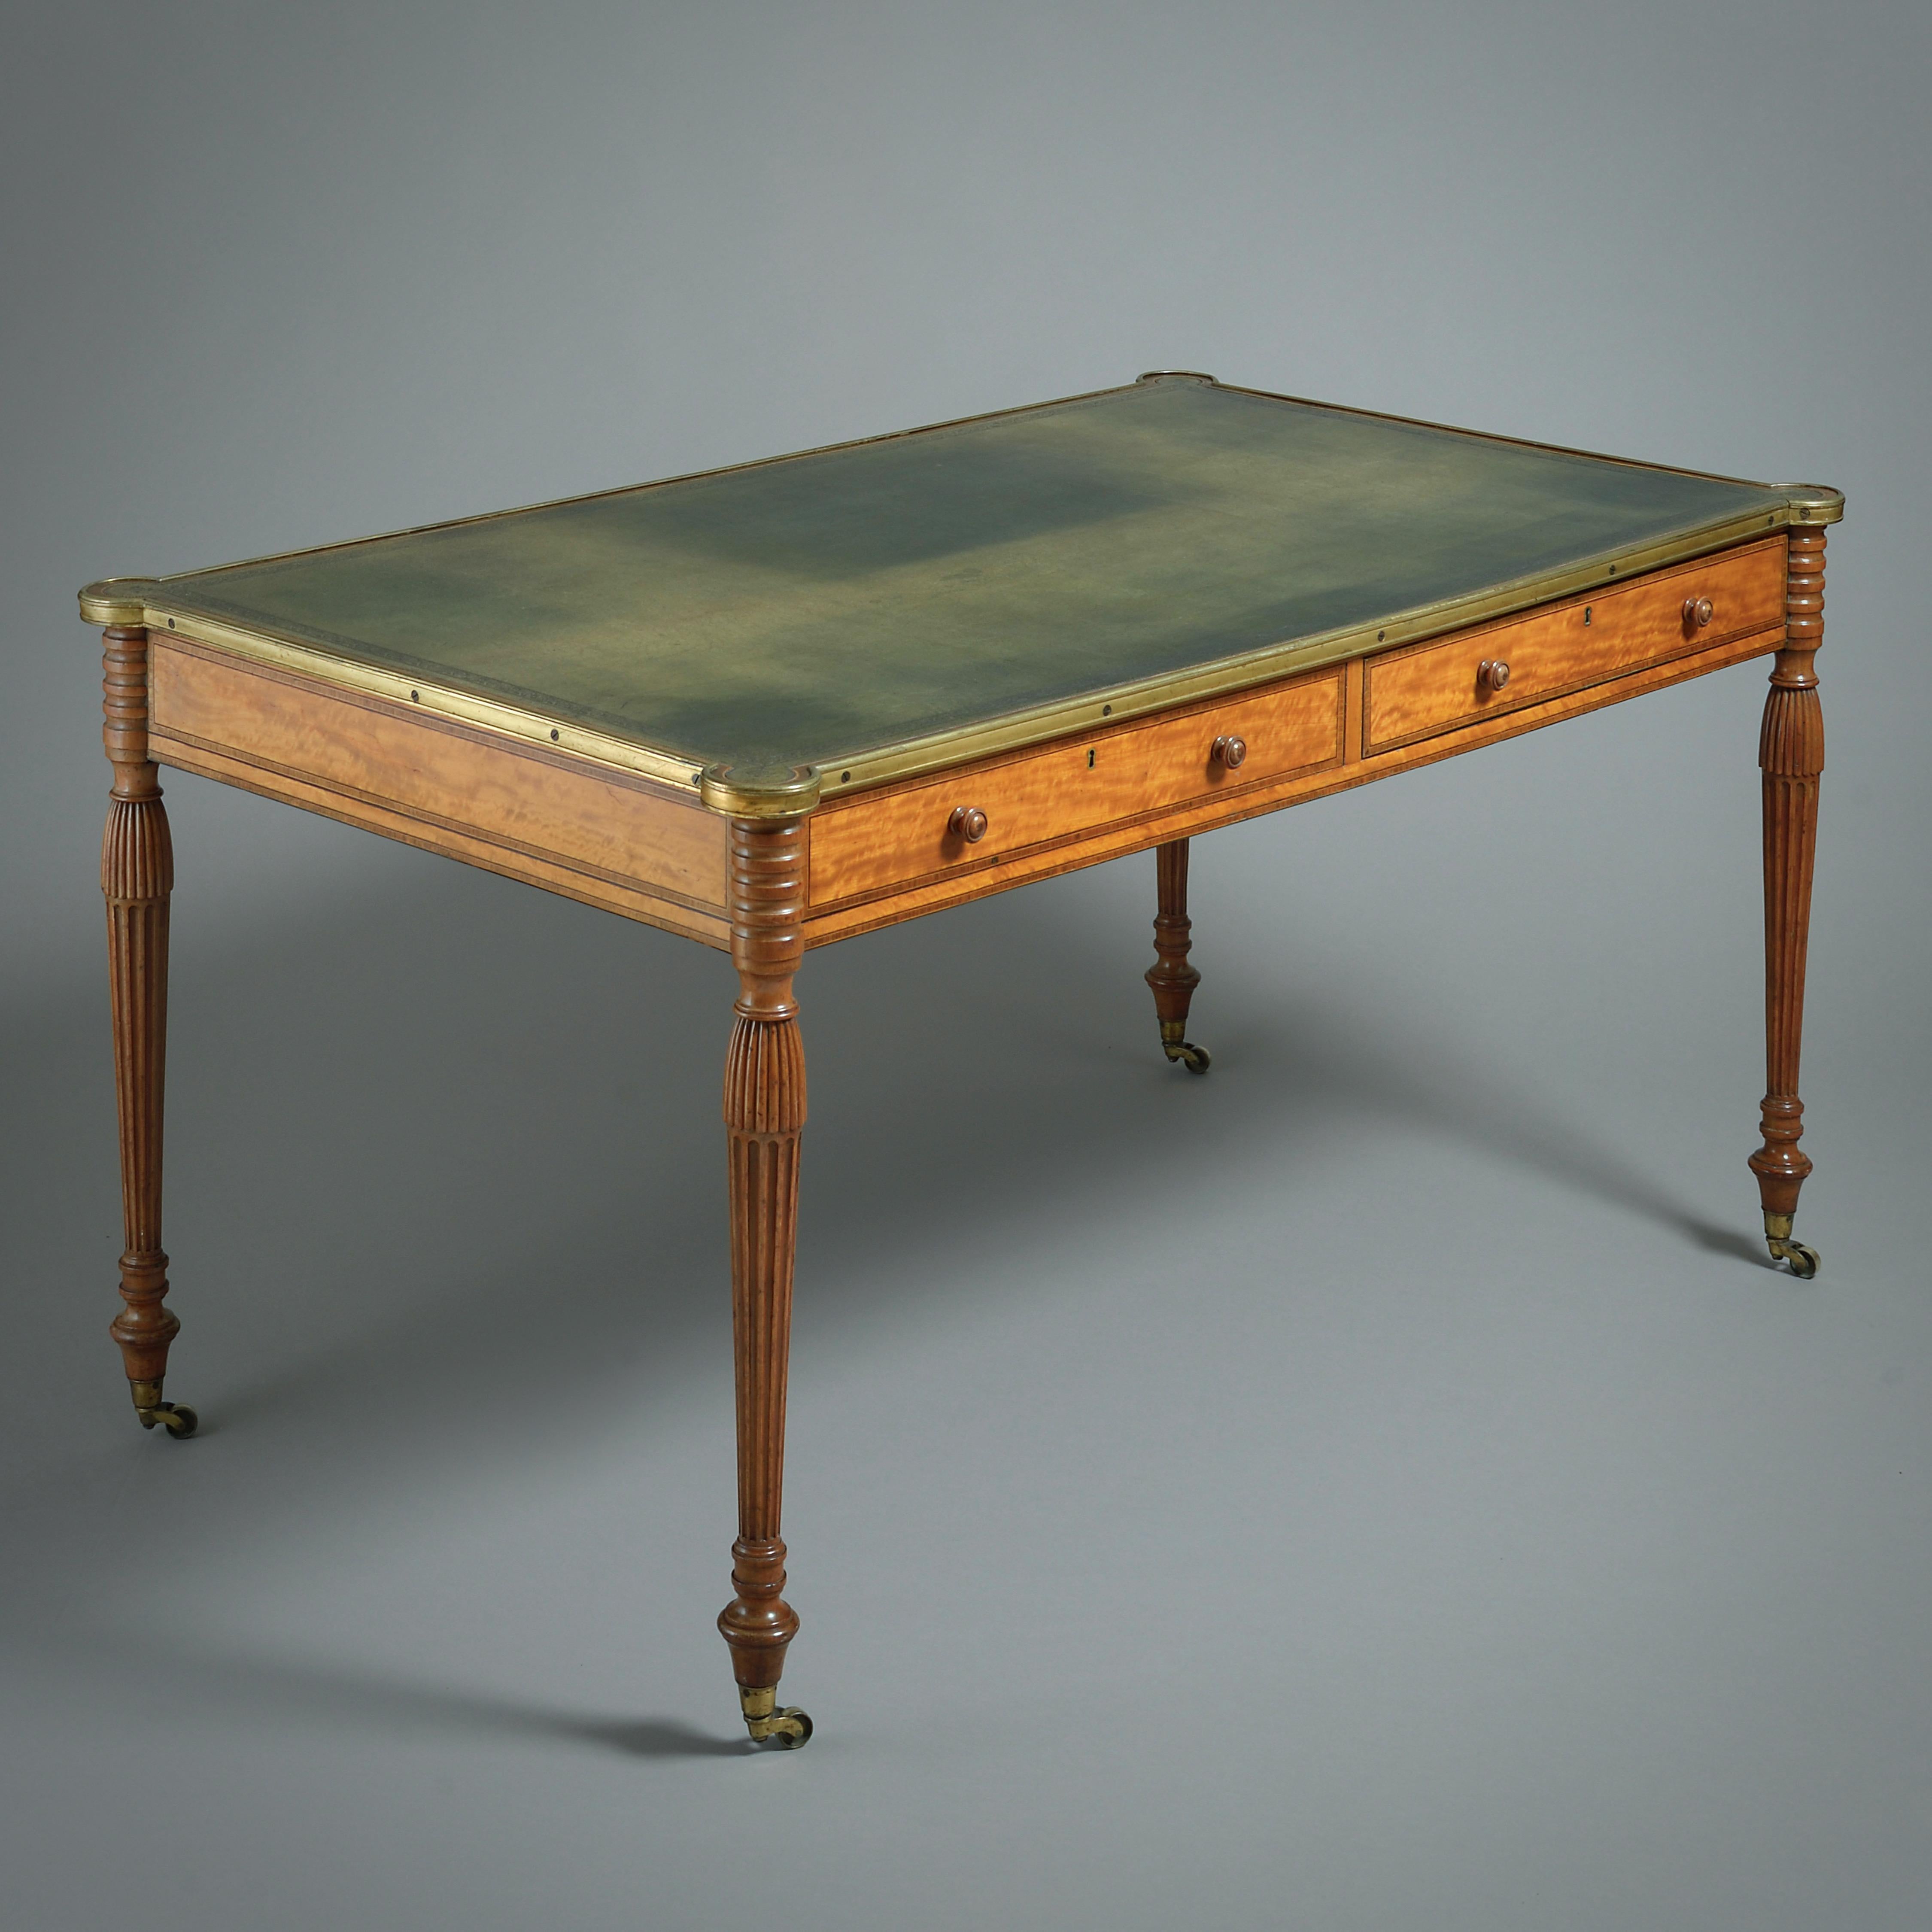 A FINE GEORGE III BRASS-MOUNTED SATINWOOD WRITING-TABLE, CIRCA 1790.

The frieze crossbanded in kingwood fitted with a cedar-lined drawer to each side.